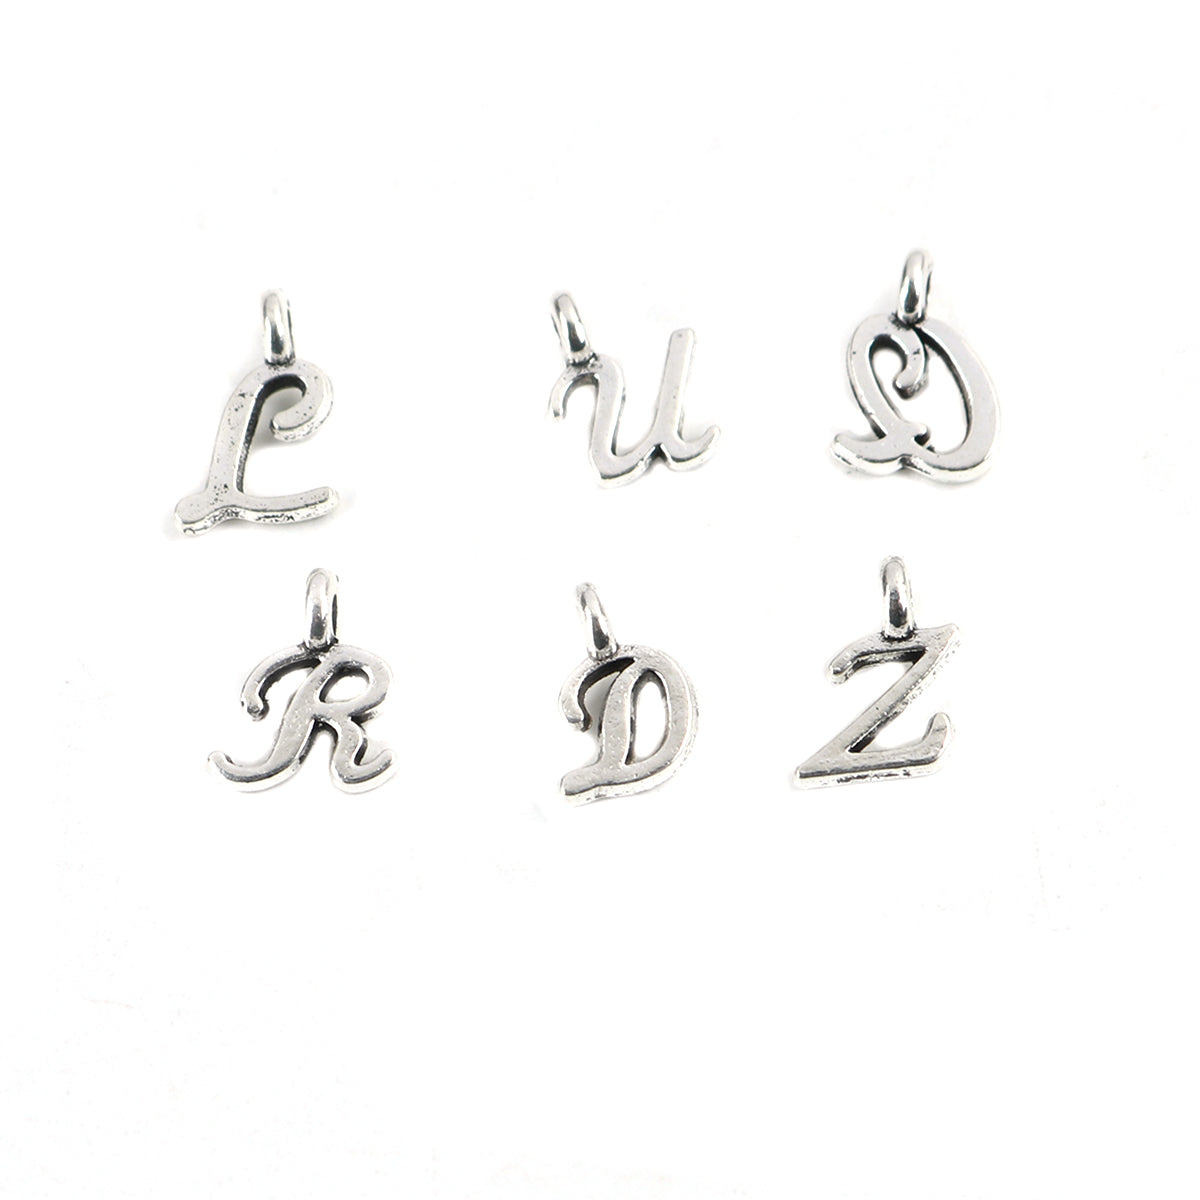 1 Full Alphabet 26 Letters A Through Z Silver Tone Charms SC6876